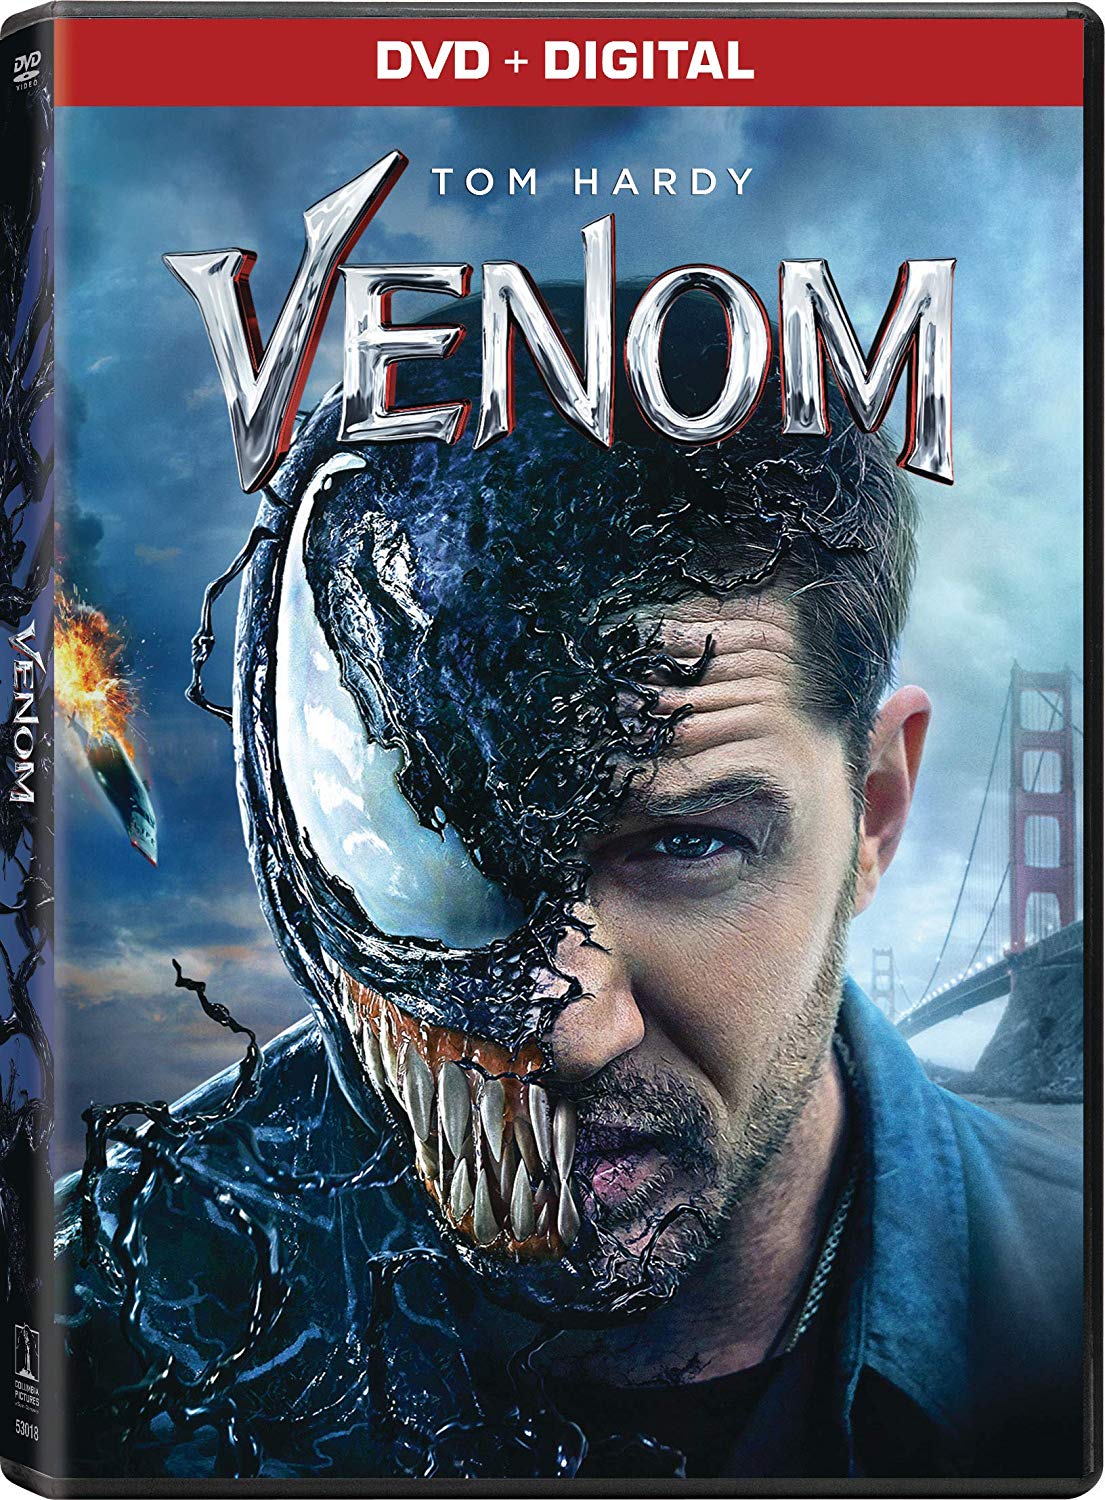 Venom DVD cover (Sony Pictures Home Entertainment)